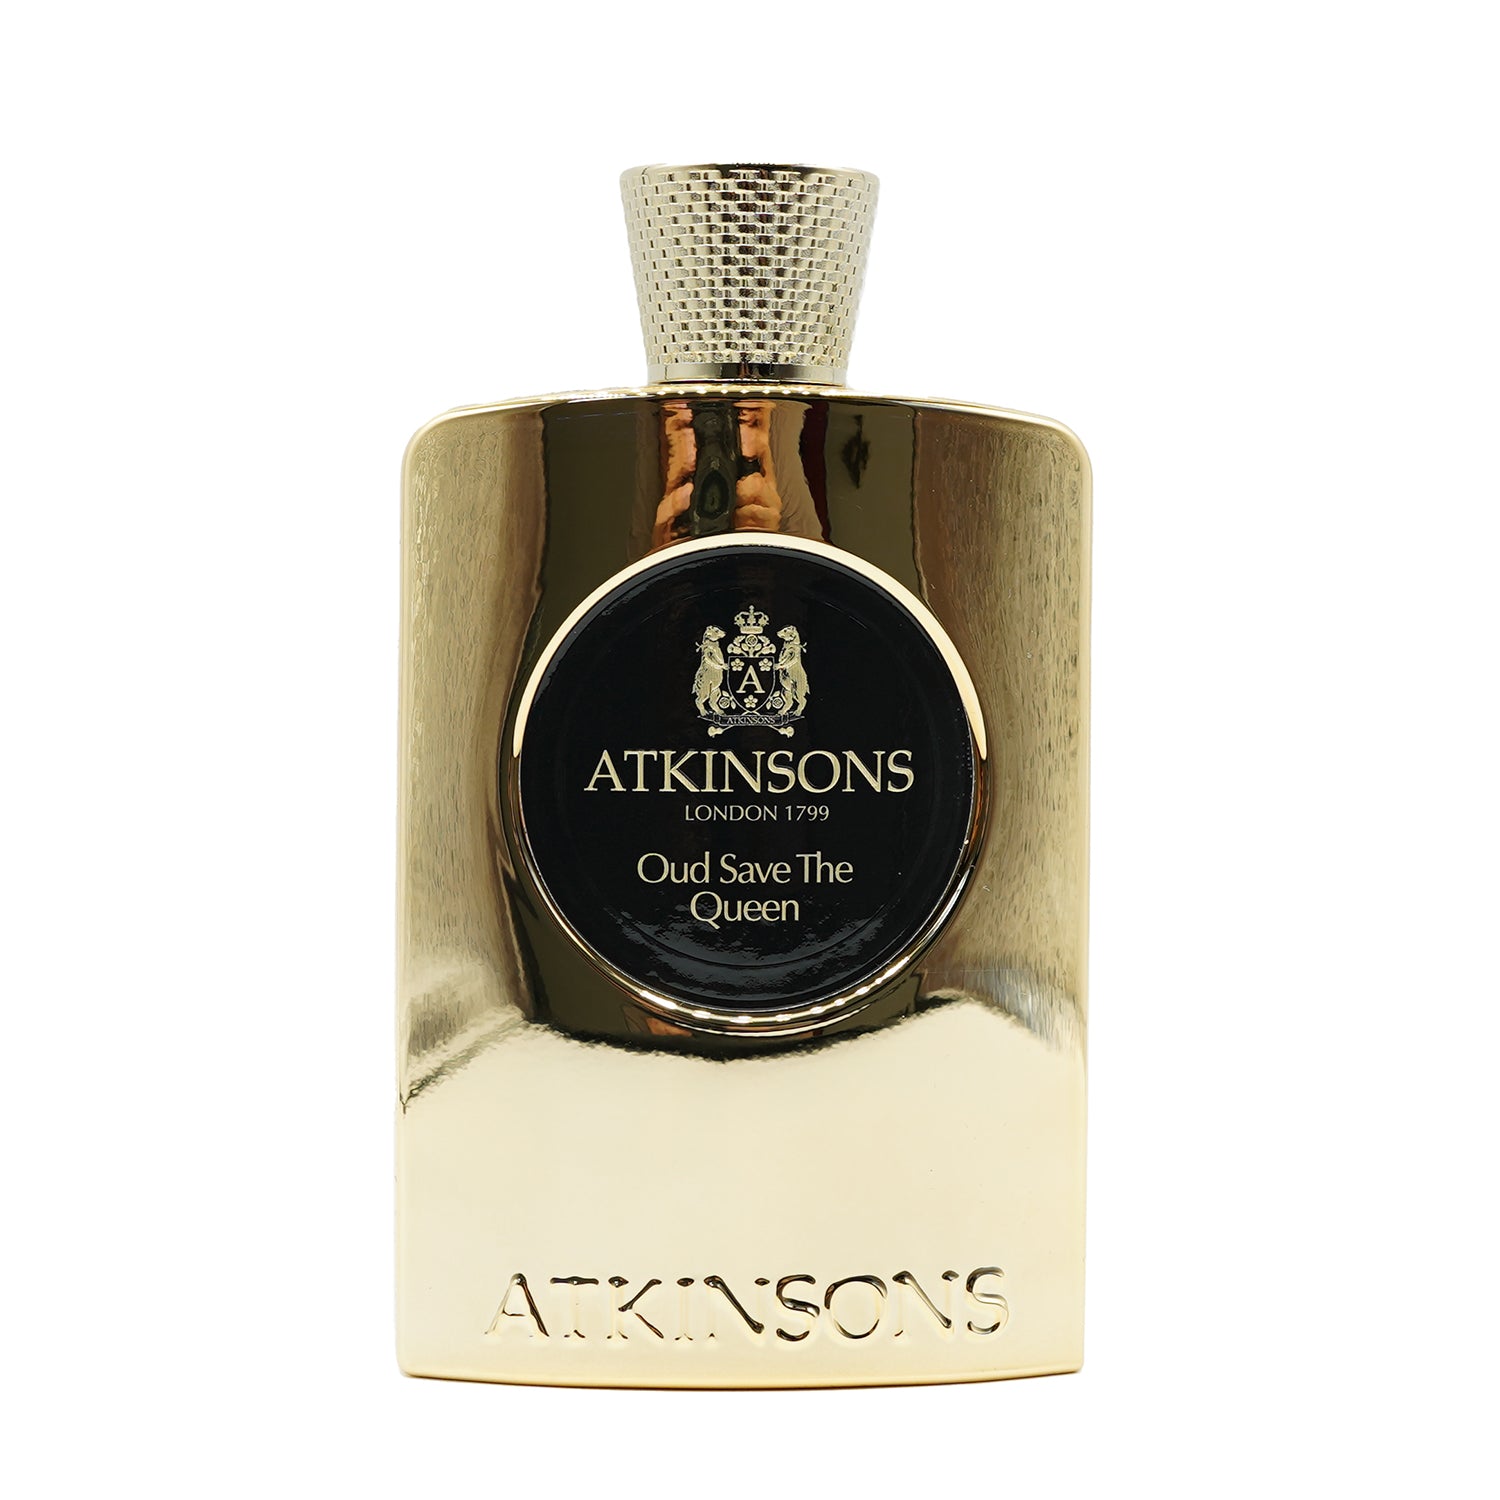 Atkinsons | Oud Save The Queen bottling 